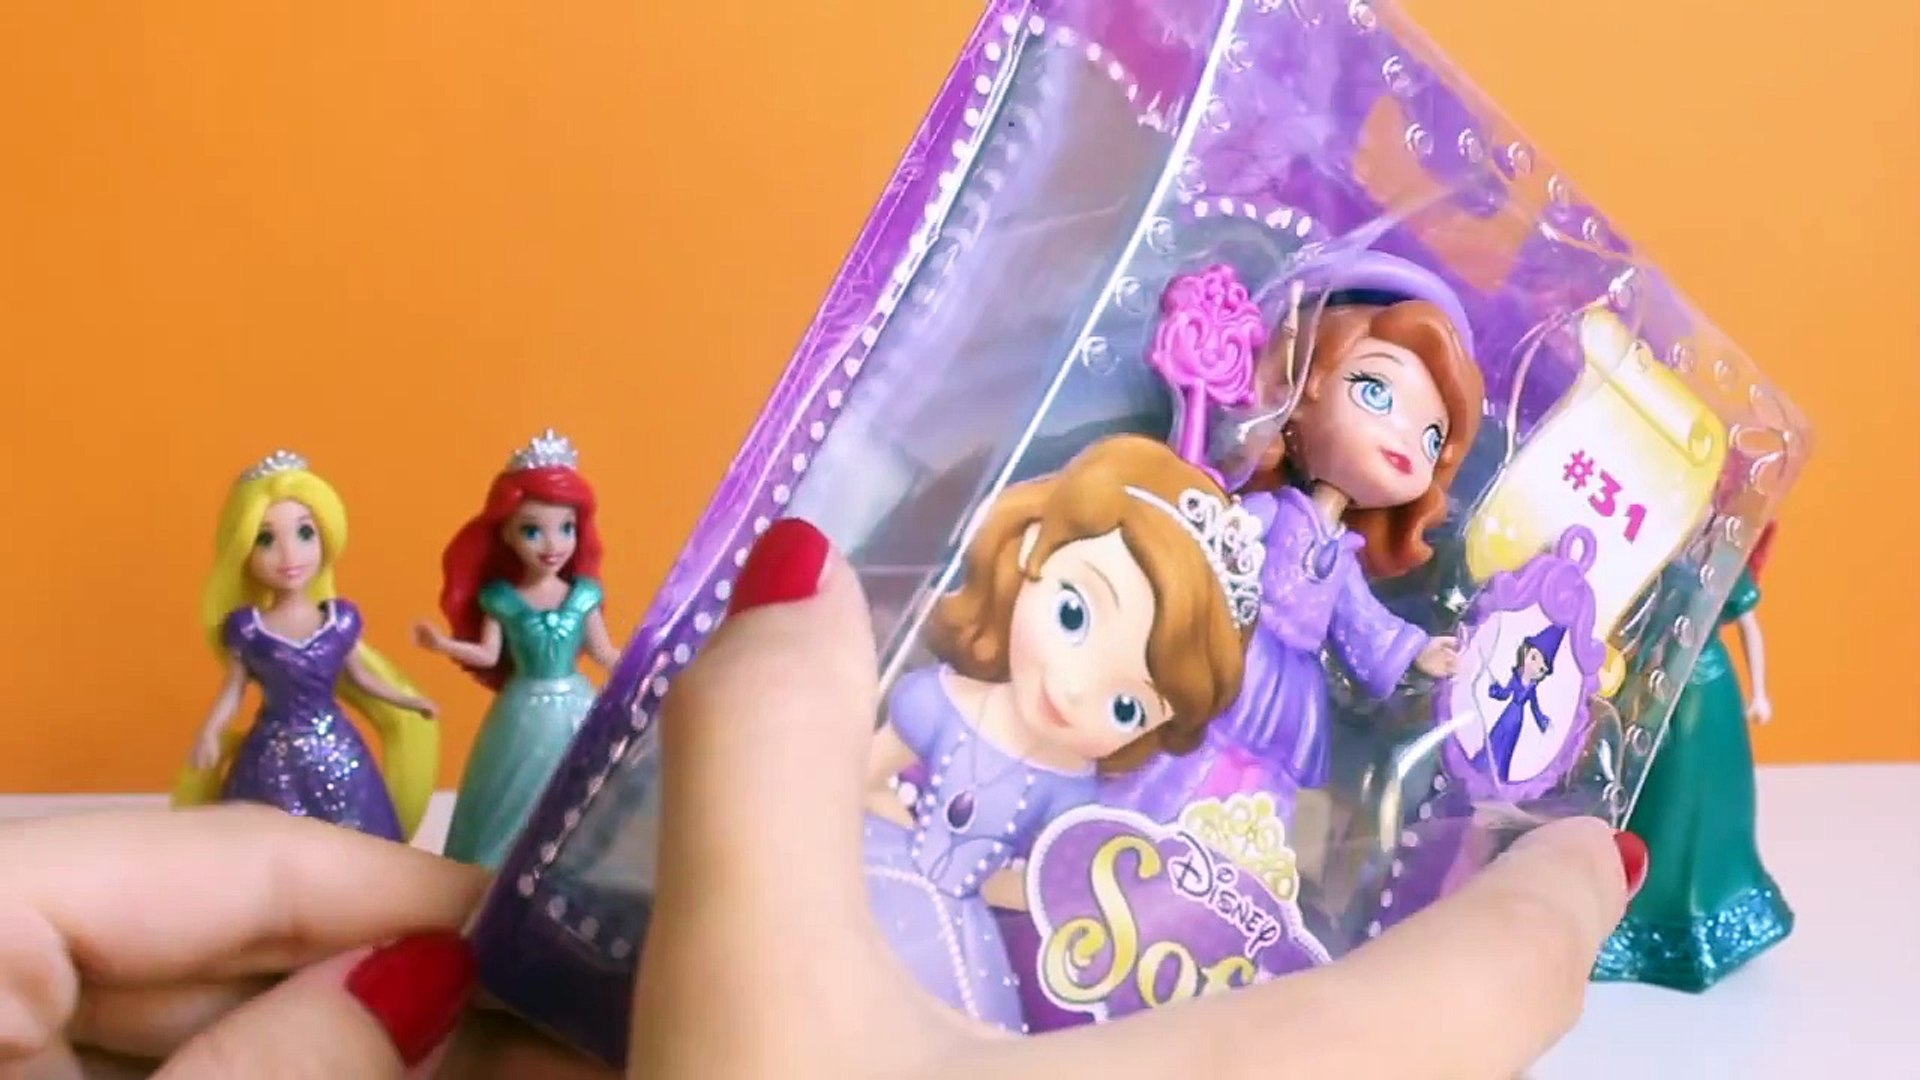 Sorcerer Sofia the First Play Doh Wizard Halloween Costume DIY with Princess  Ariel and Rapunzel - video Dailymotion